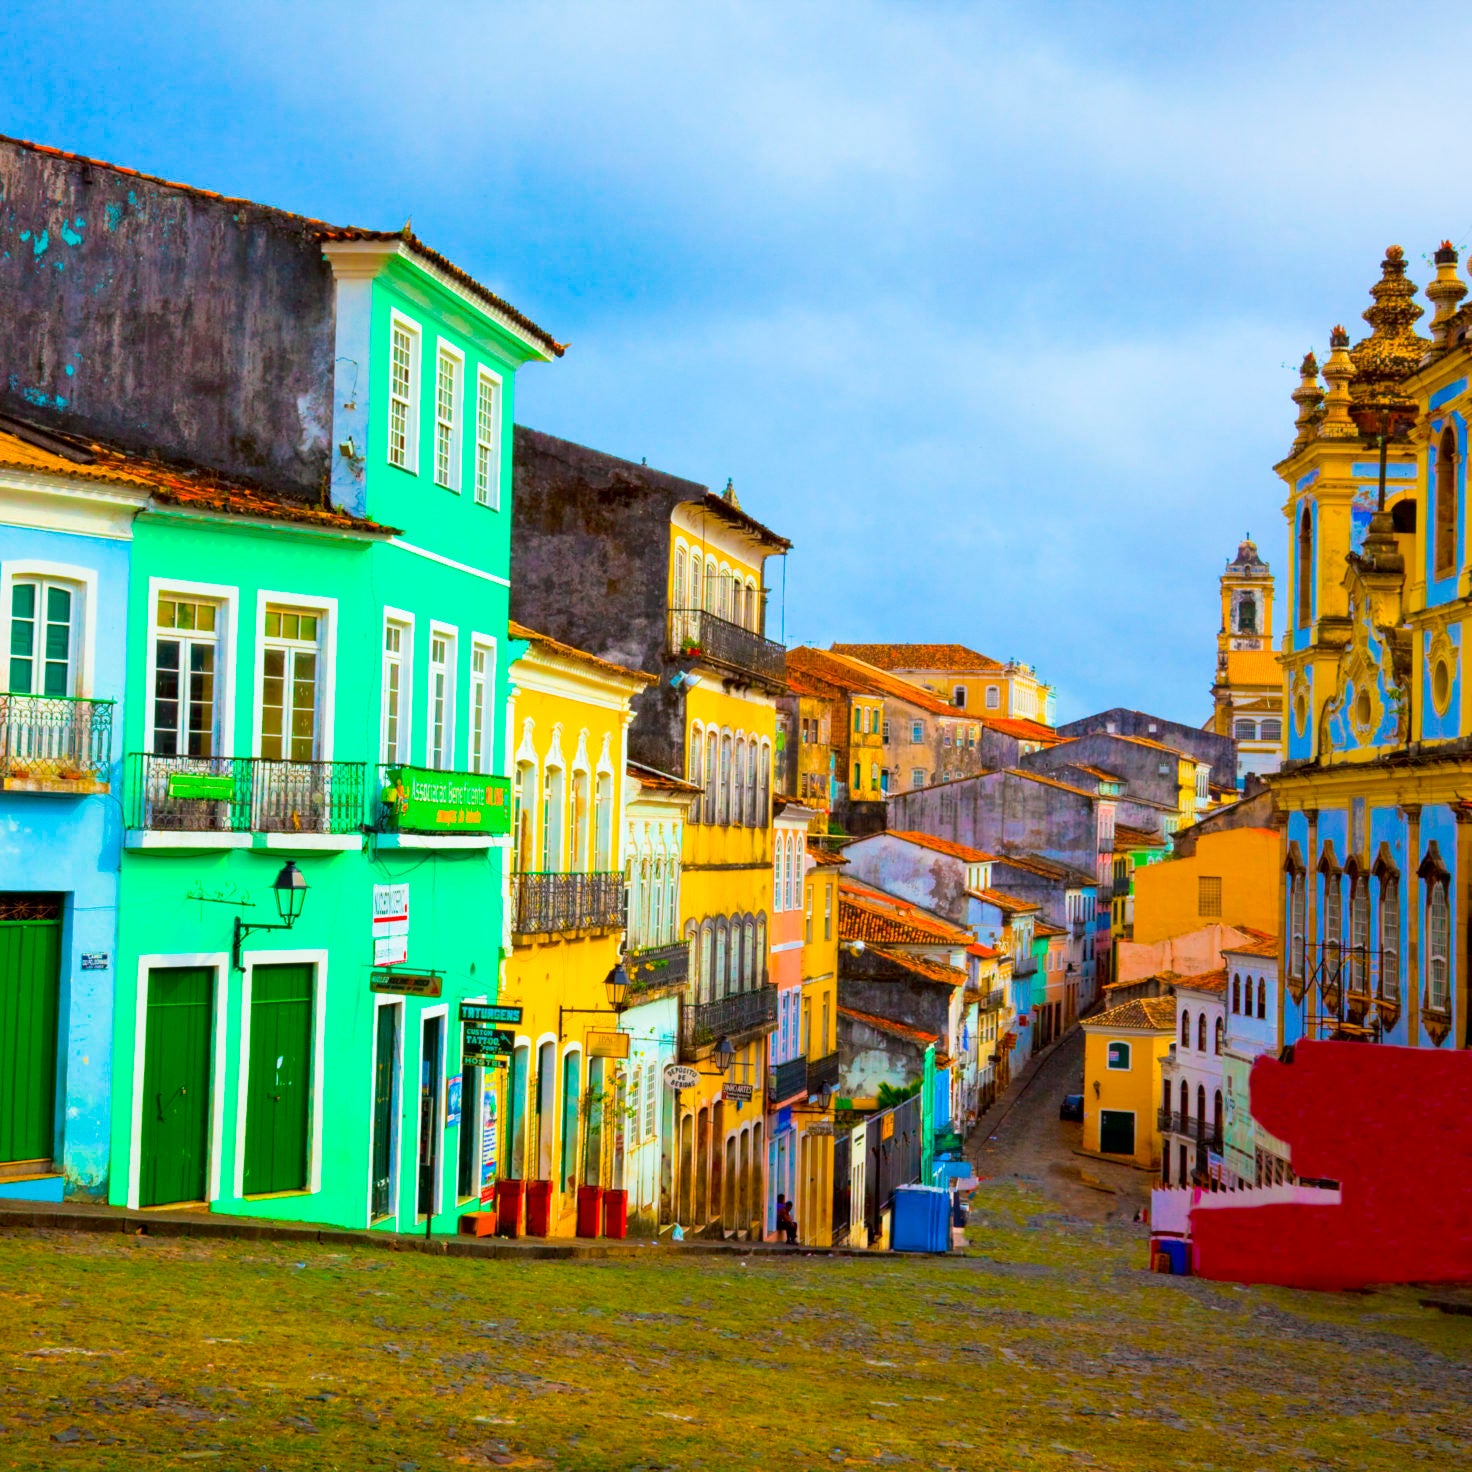 Get Lost: Our News & Politics Director Takes a Quick Jaunt to Brazil